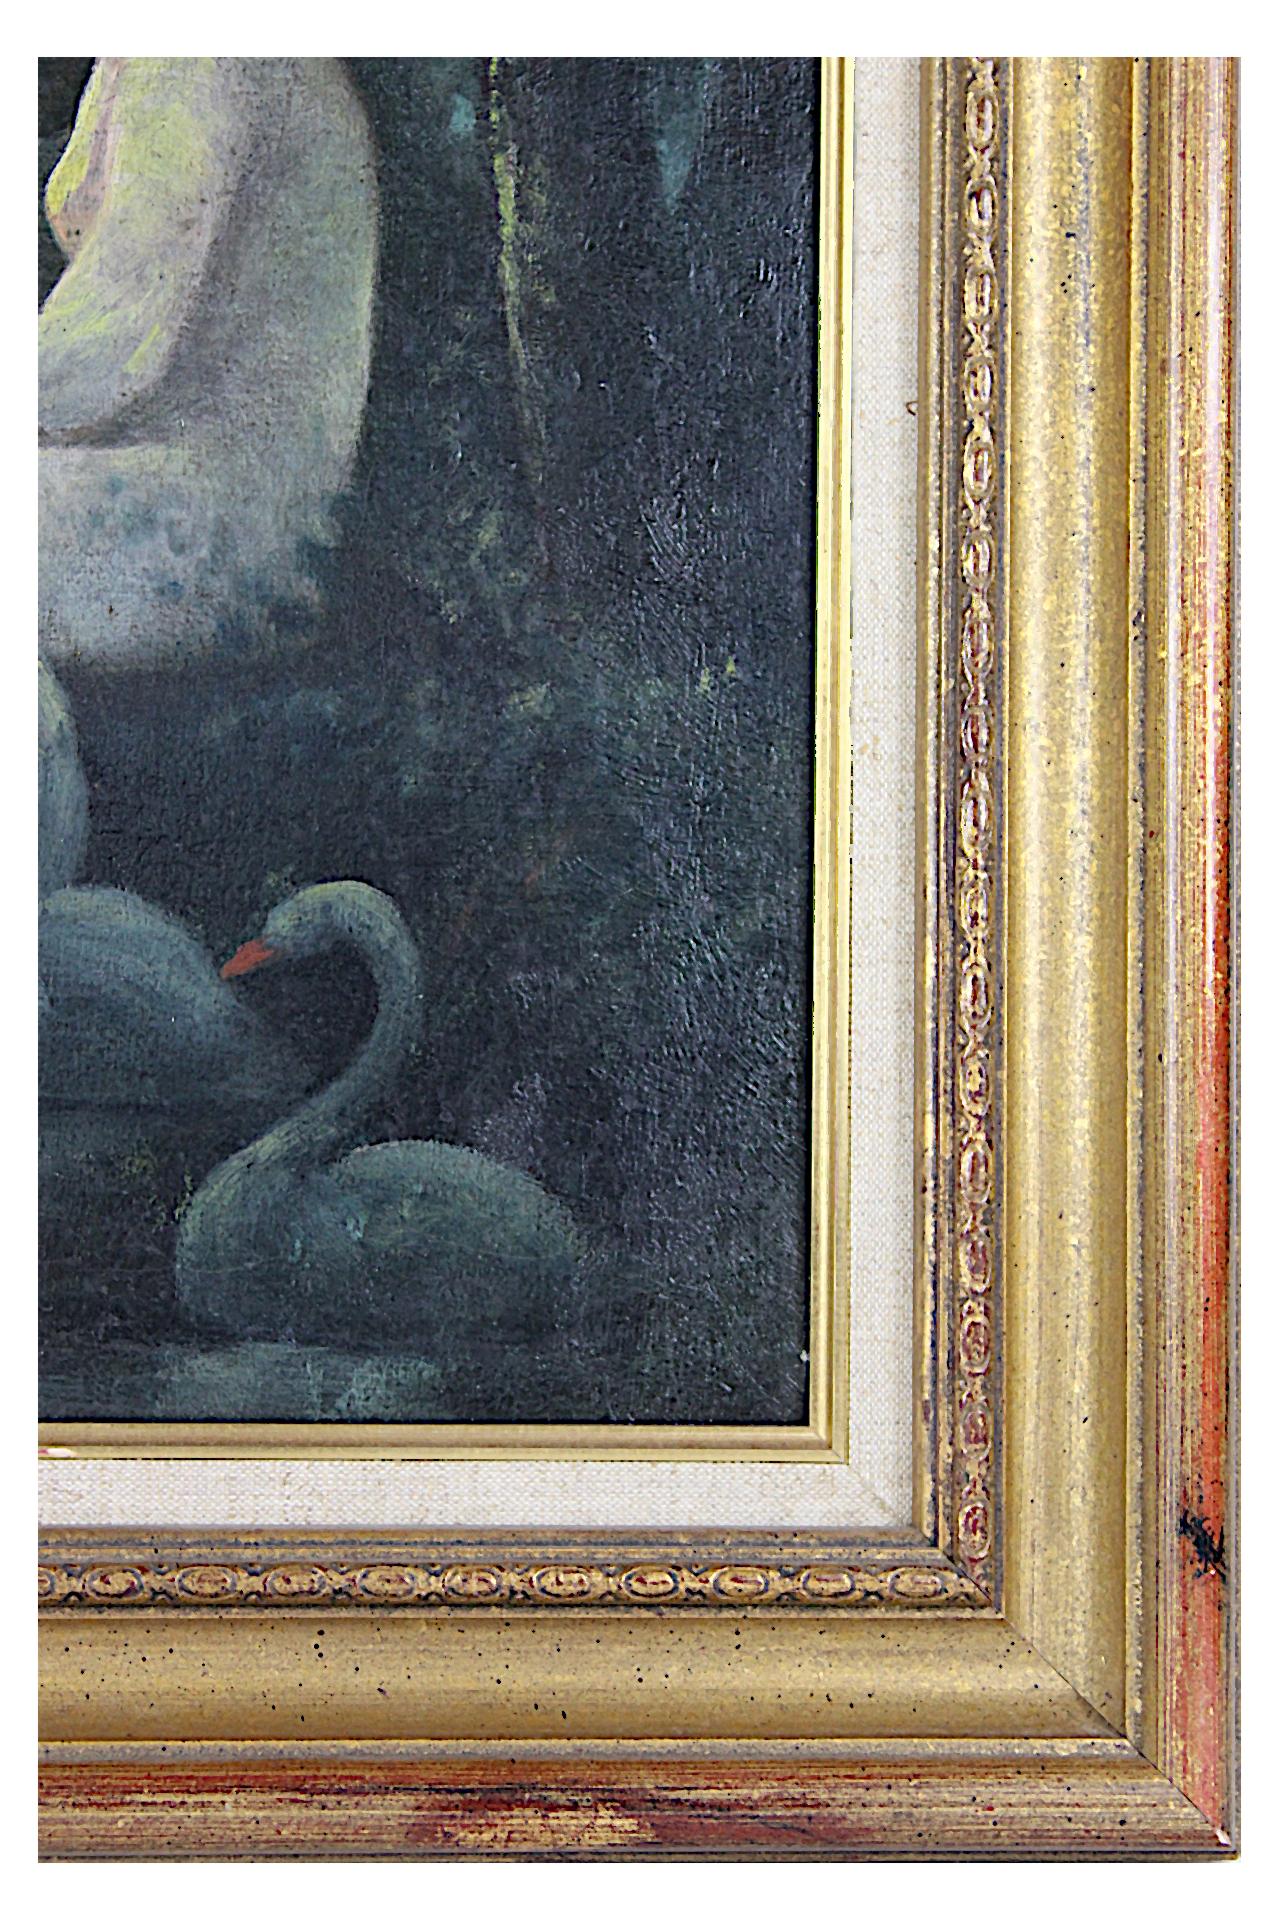 *Dimensions include the frame

This enigmatic French painting, likely from the early 20th century, exhibits a mysterious and evocative atmosphere characteristic of the Romantic movement. The solitary figure, draped in shadow and contemplation,